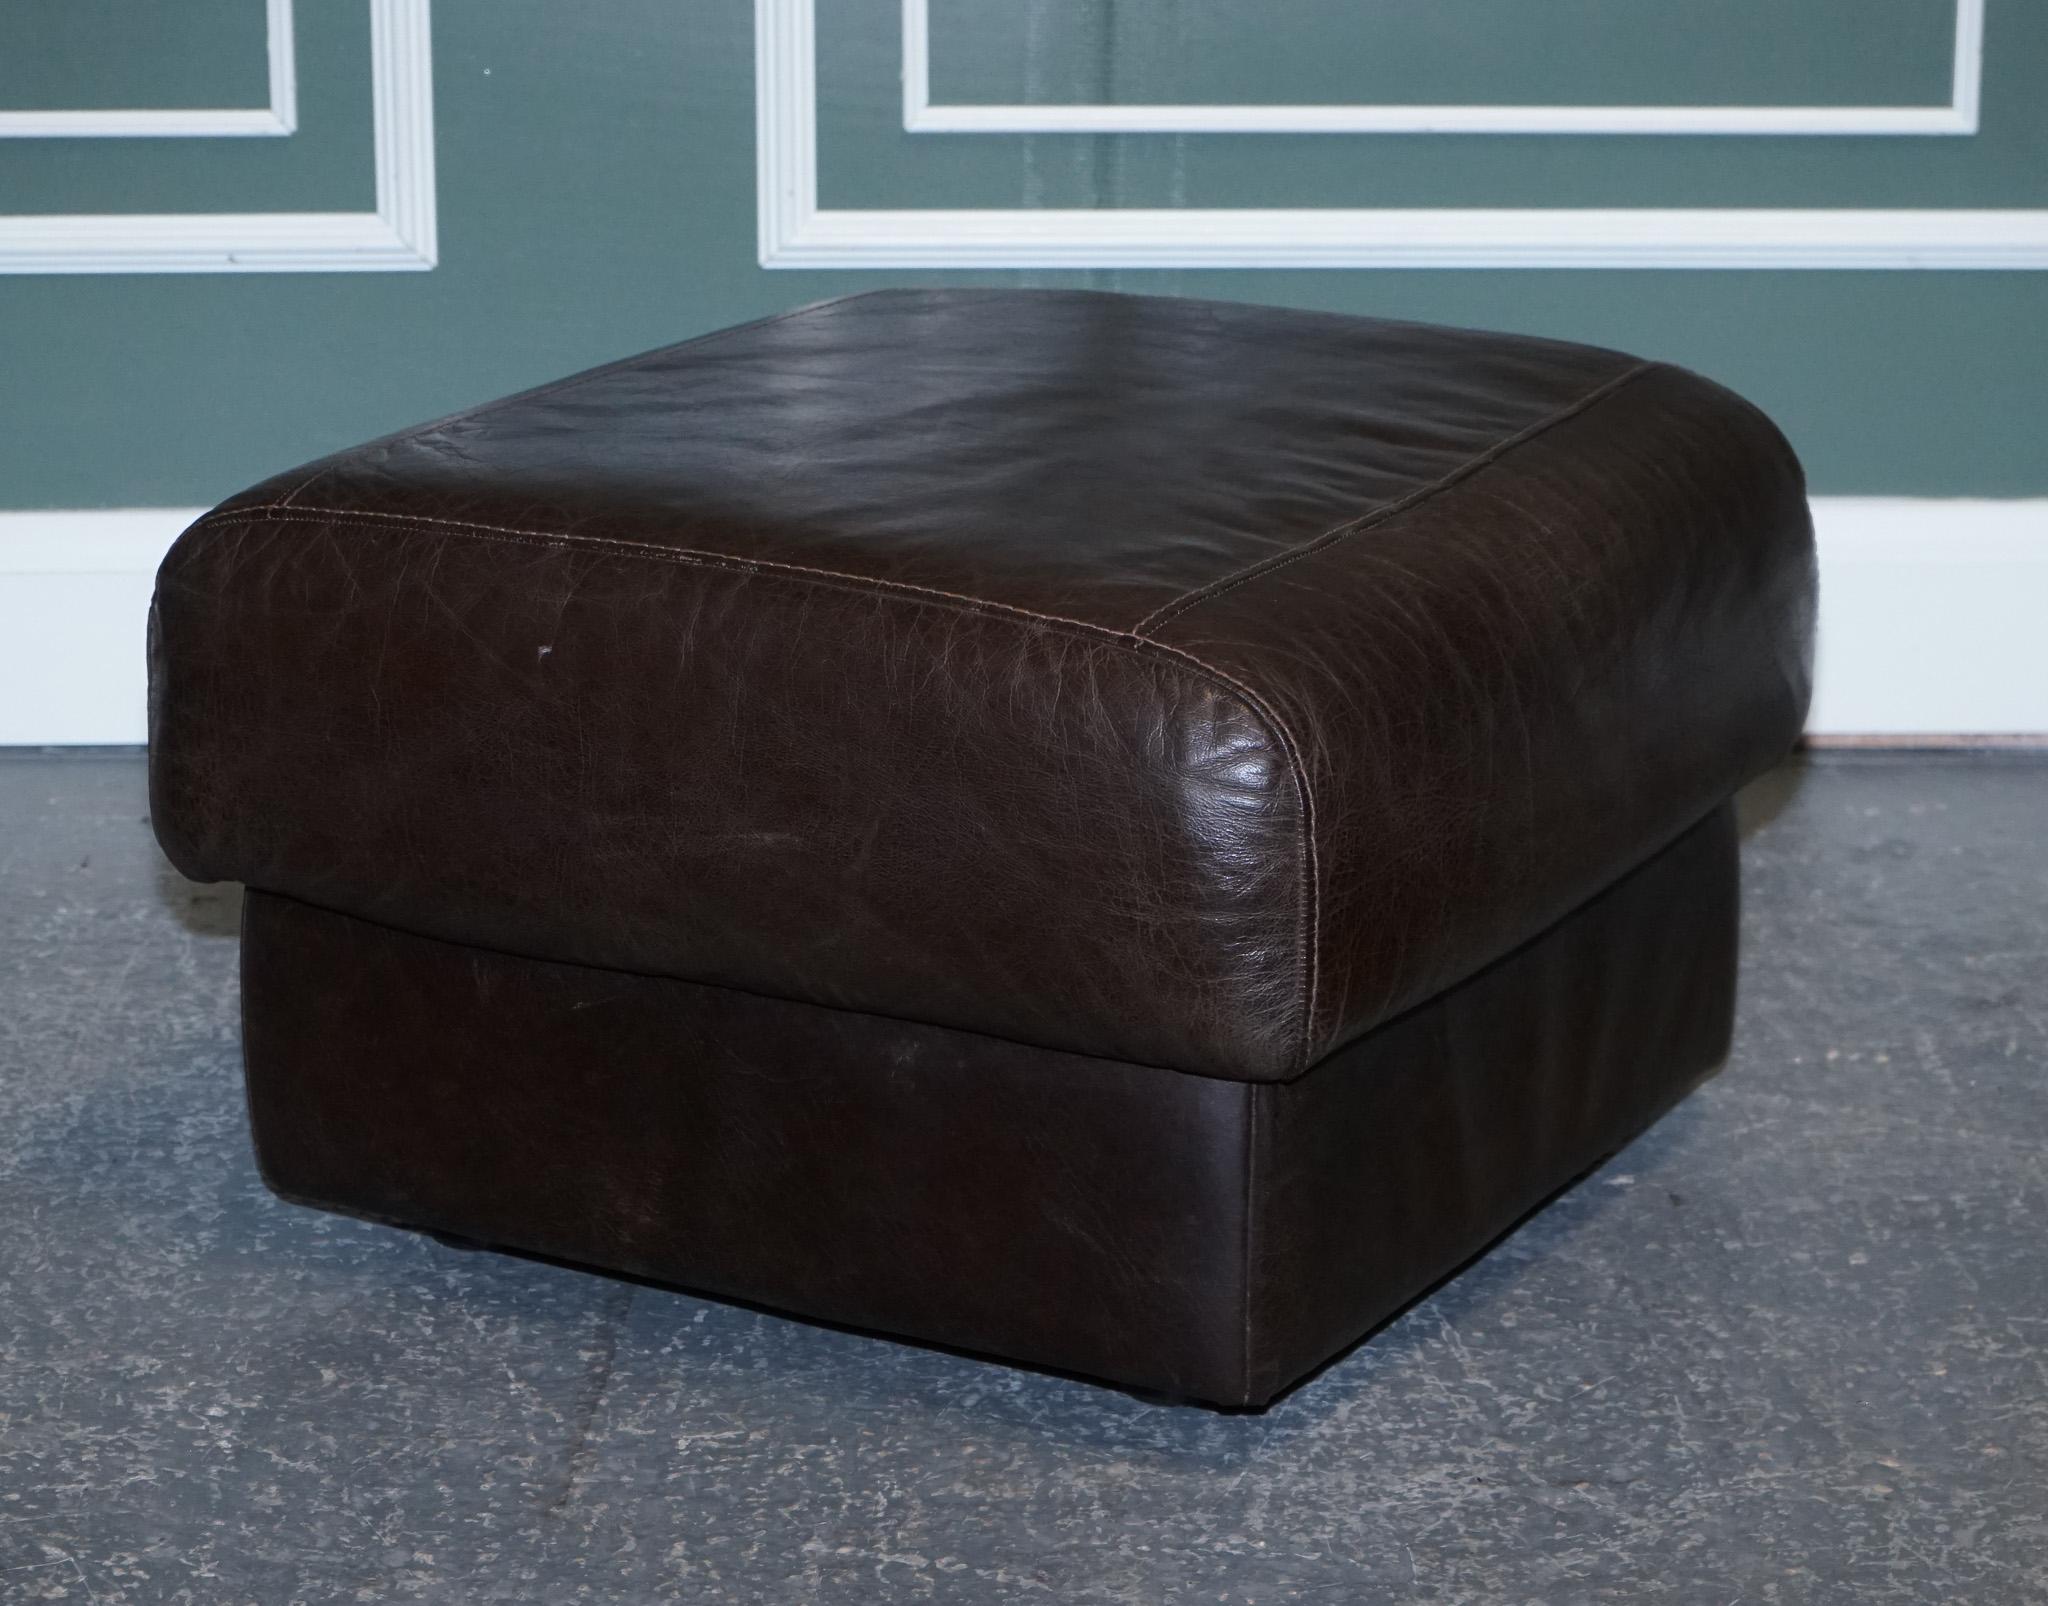 We are delighted to present this vintage chocolate brown leather footstool.




We have deep cleaned the footstool throughout, hand waxed and hand polished the leather.

Condition-wise, there will be some patina and cosmetic wear here and